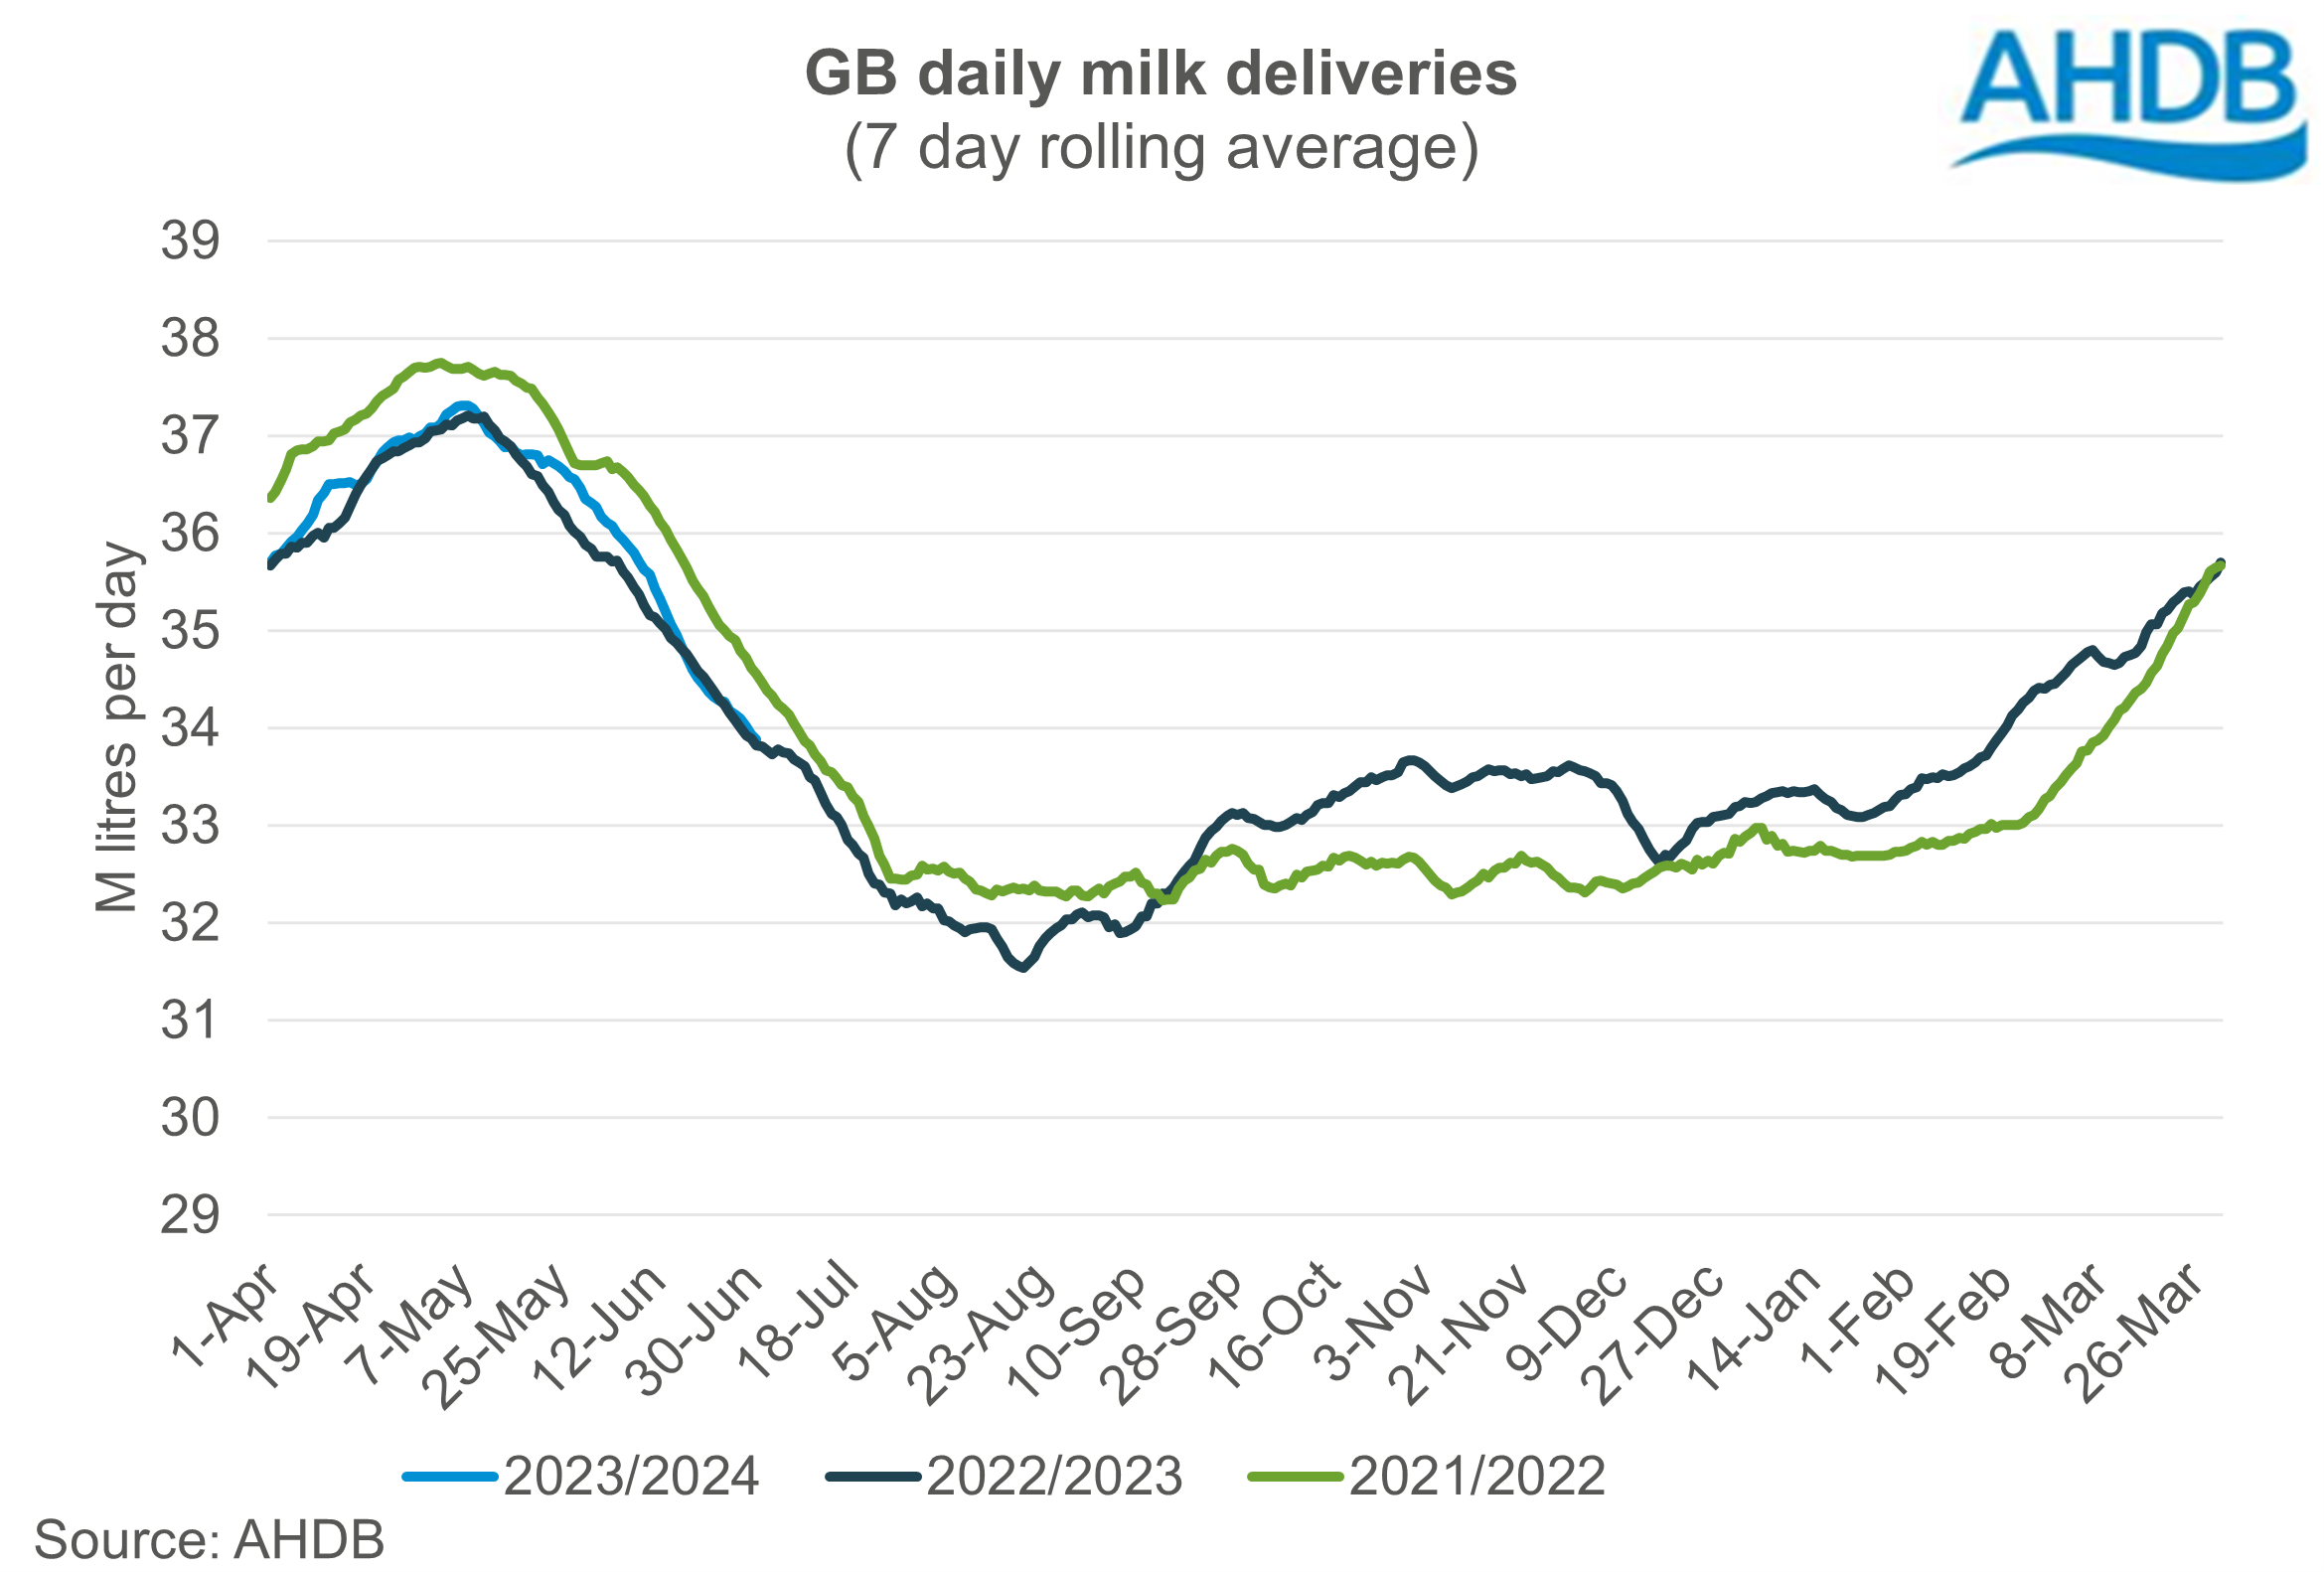 line graph showing the 7 day rolling average for GB milk deliveries